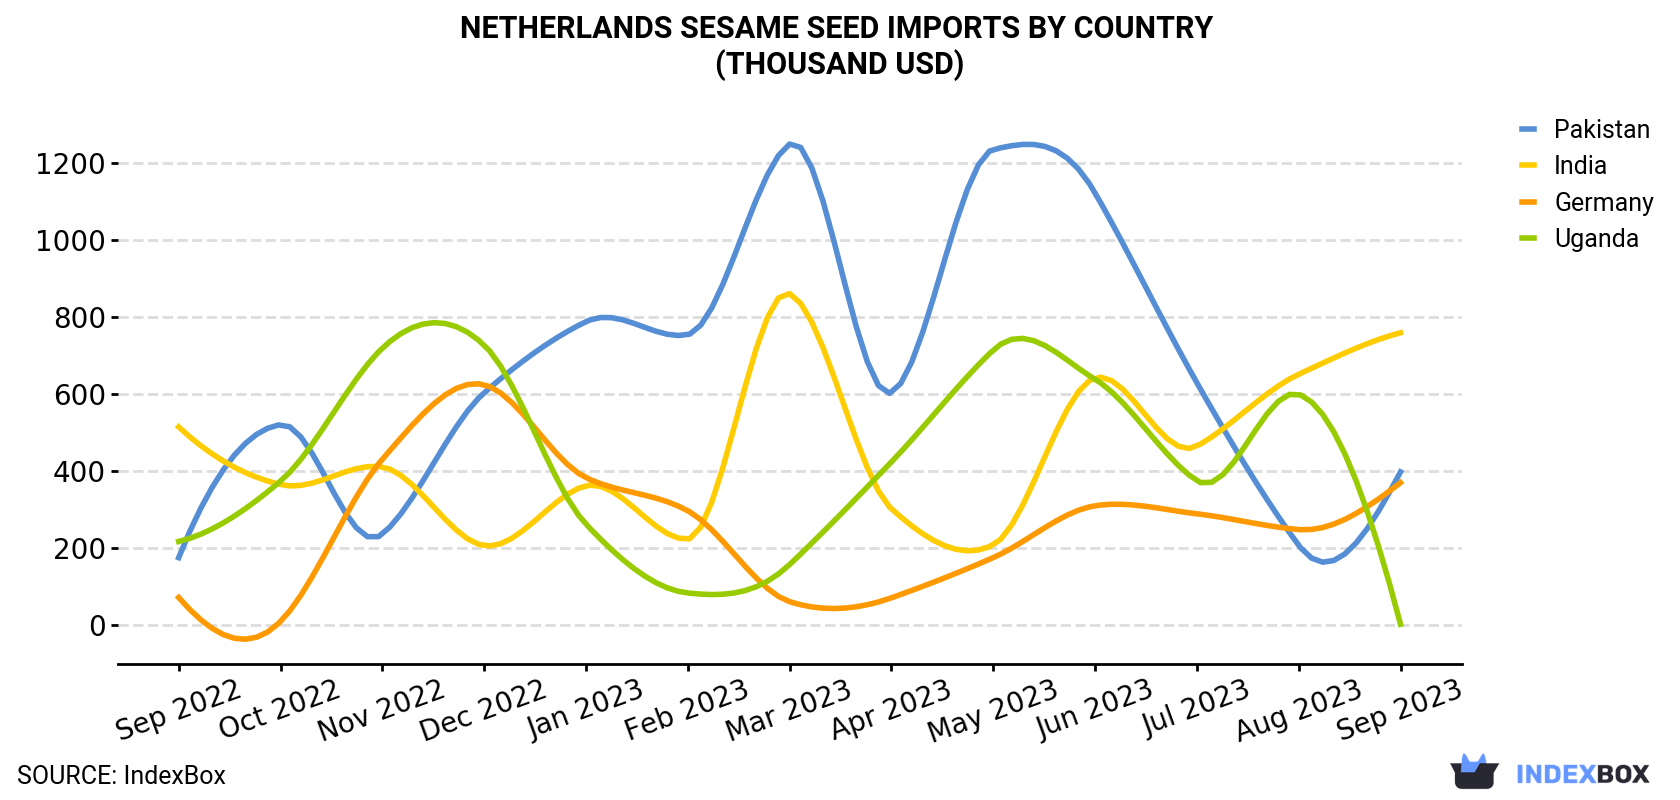 Netherlands Sesame Seed Imports By Country (Thousand USD)